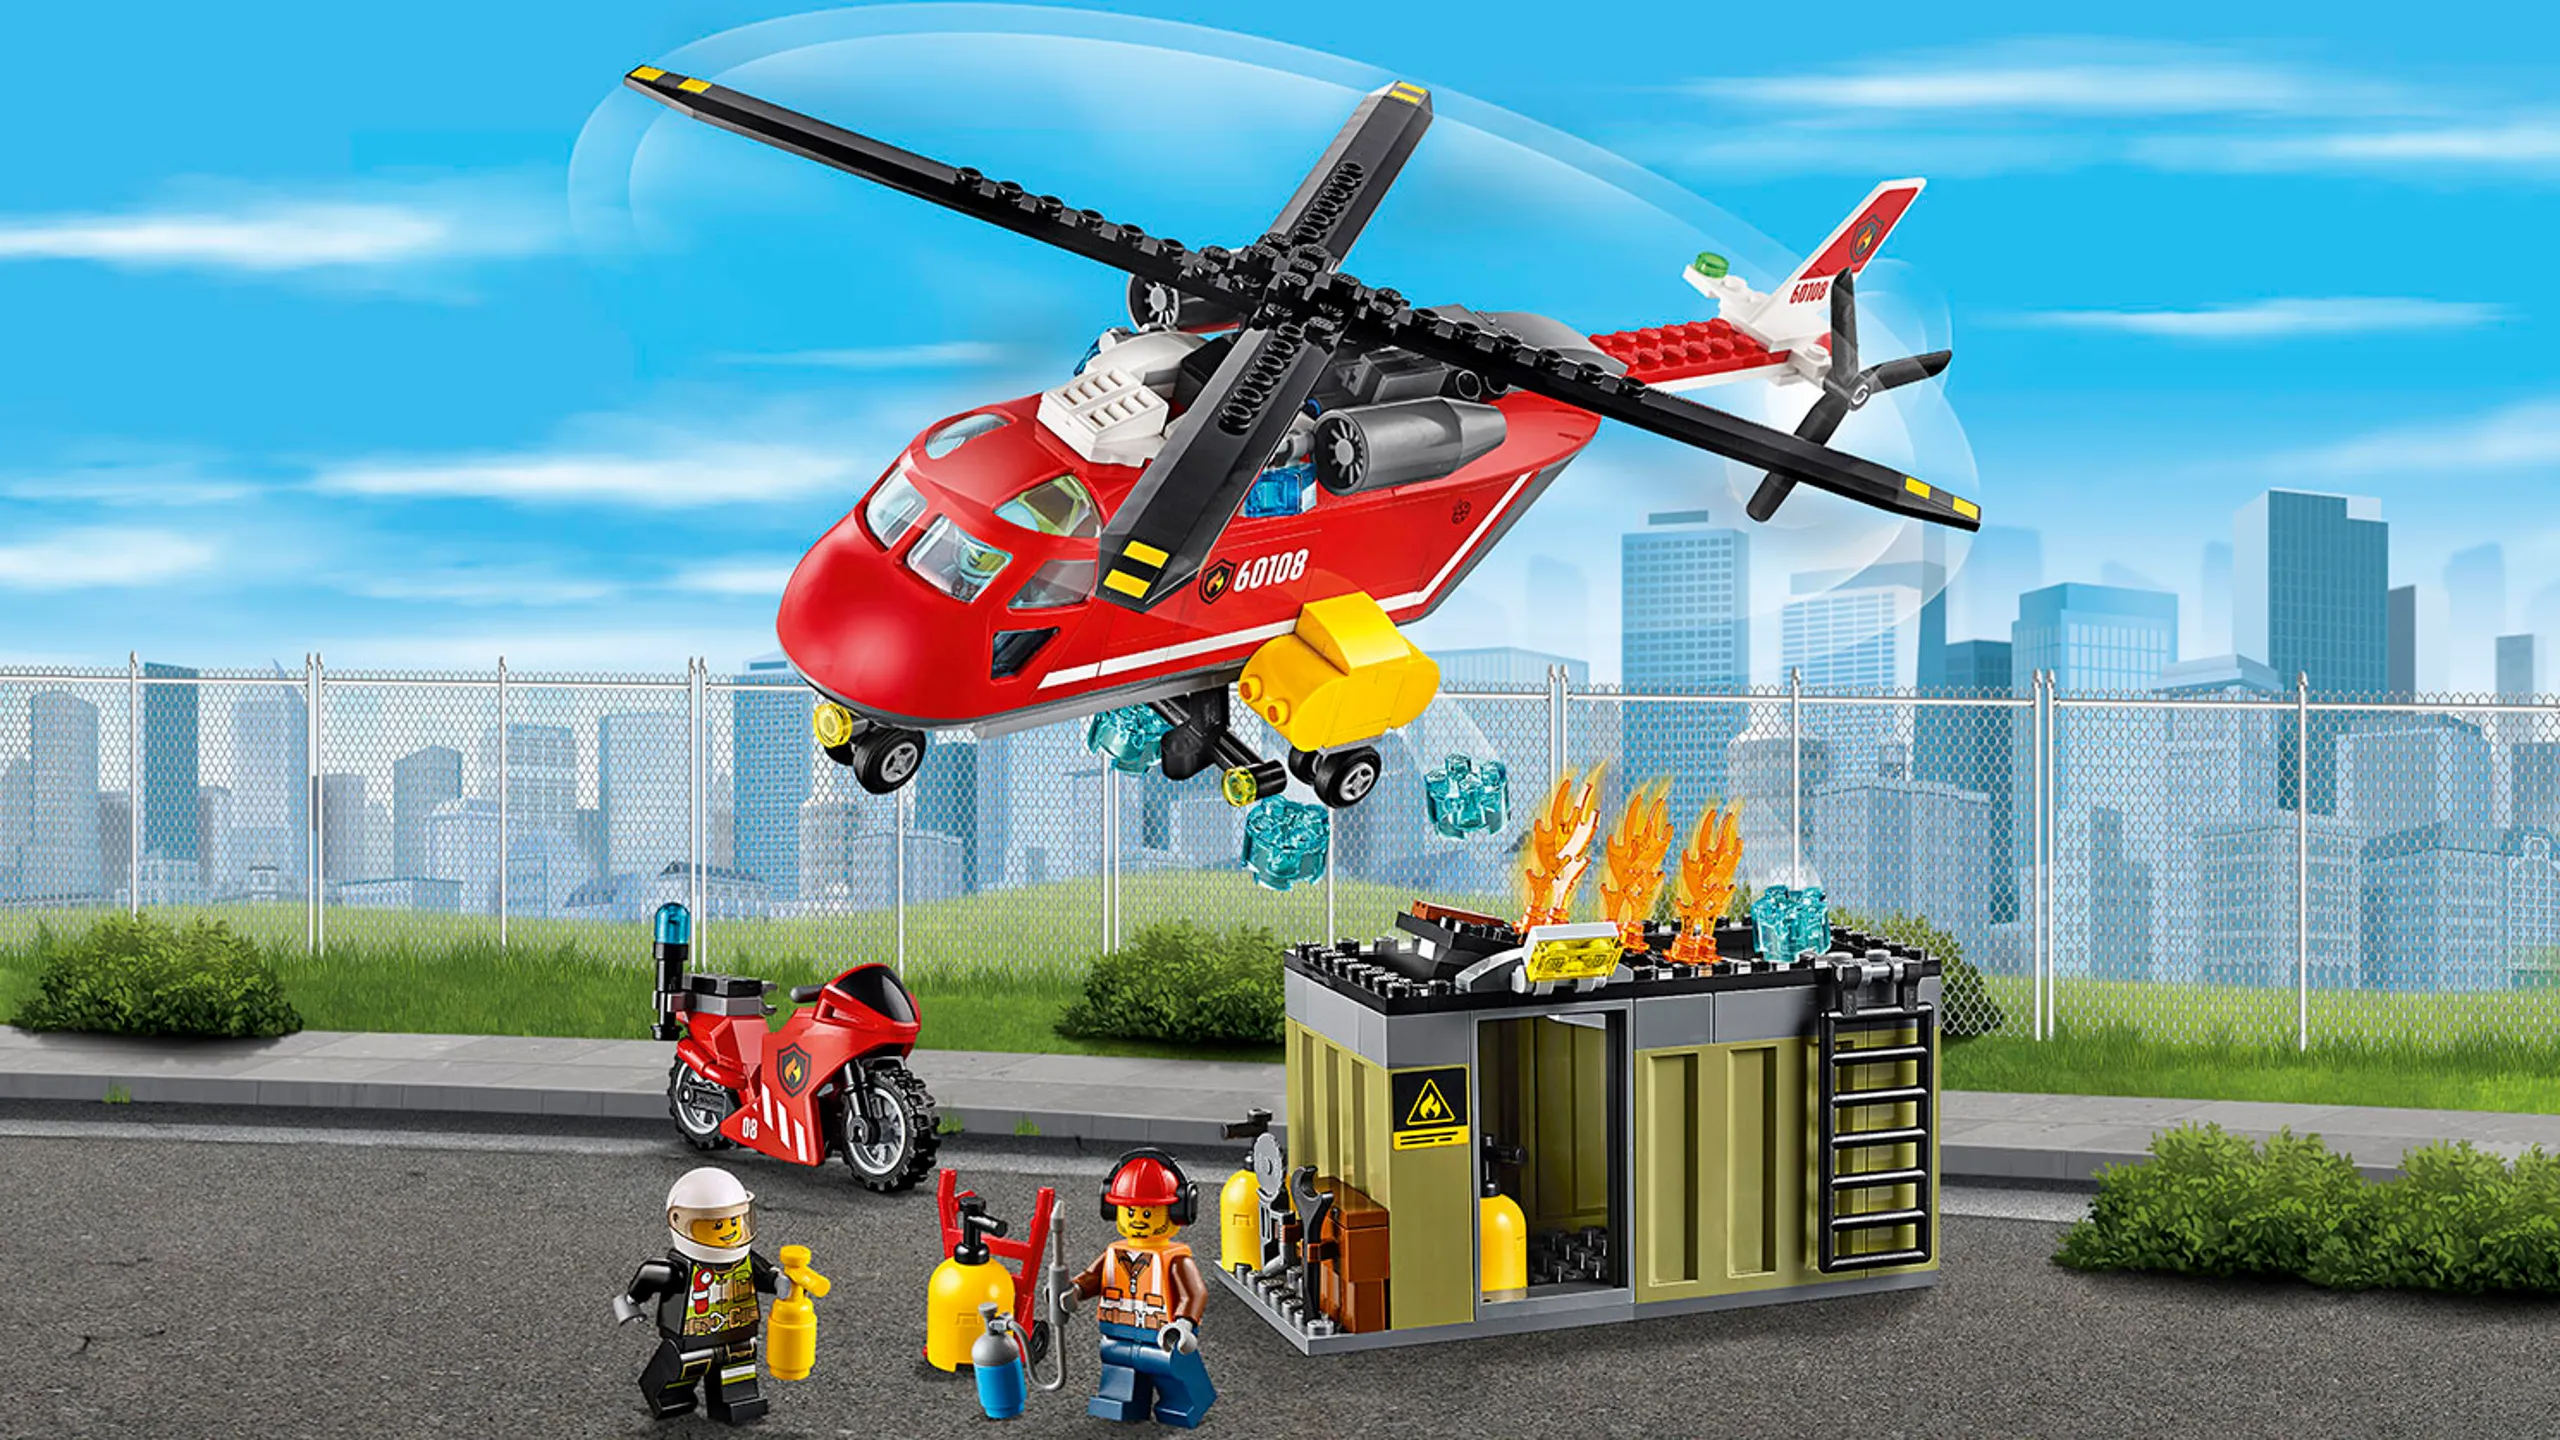 LEGO City Fire - 60108 Fire Response Unit - Get close to the fire on your motorcycle and put out the fire from above with the helicopter.